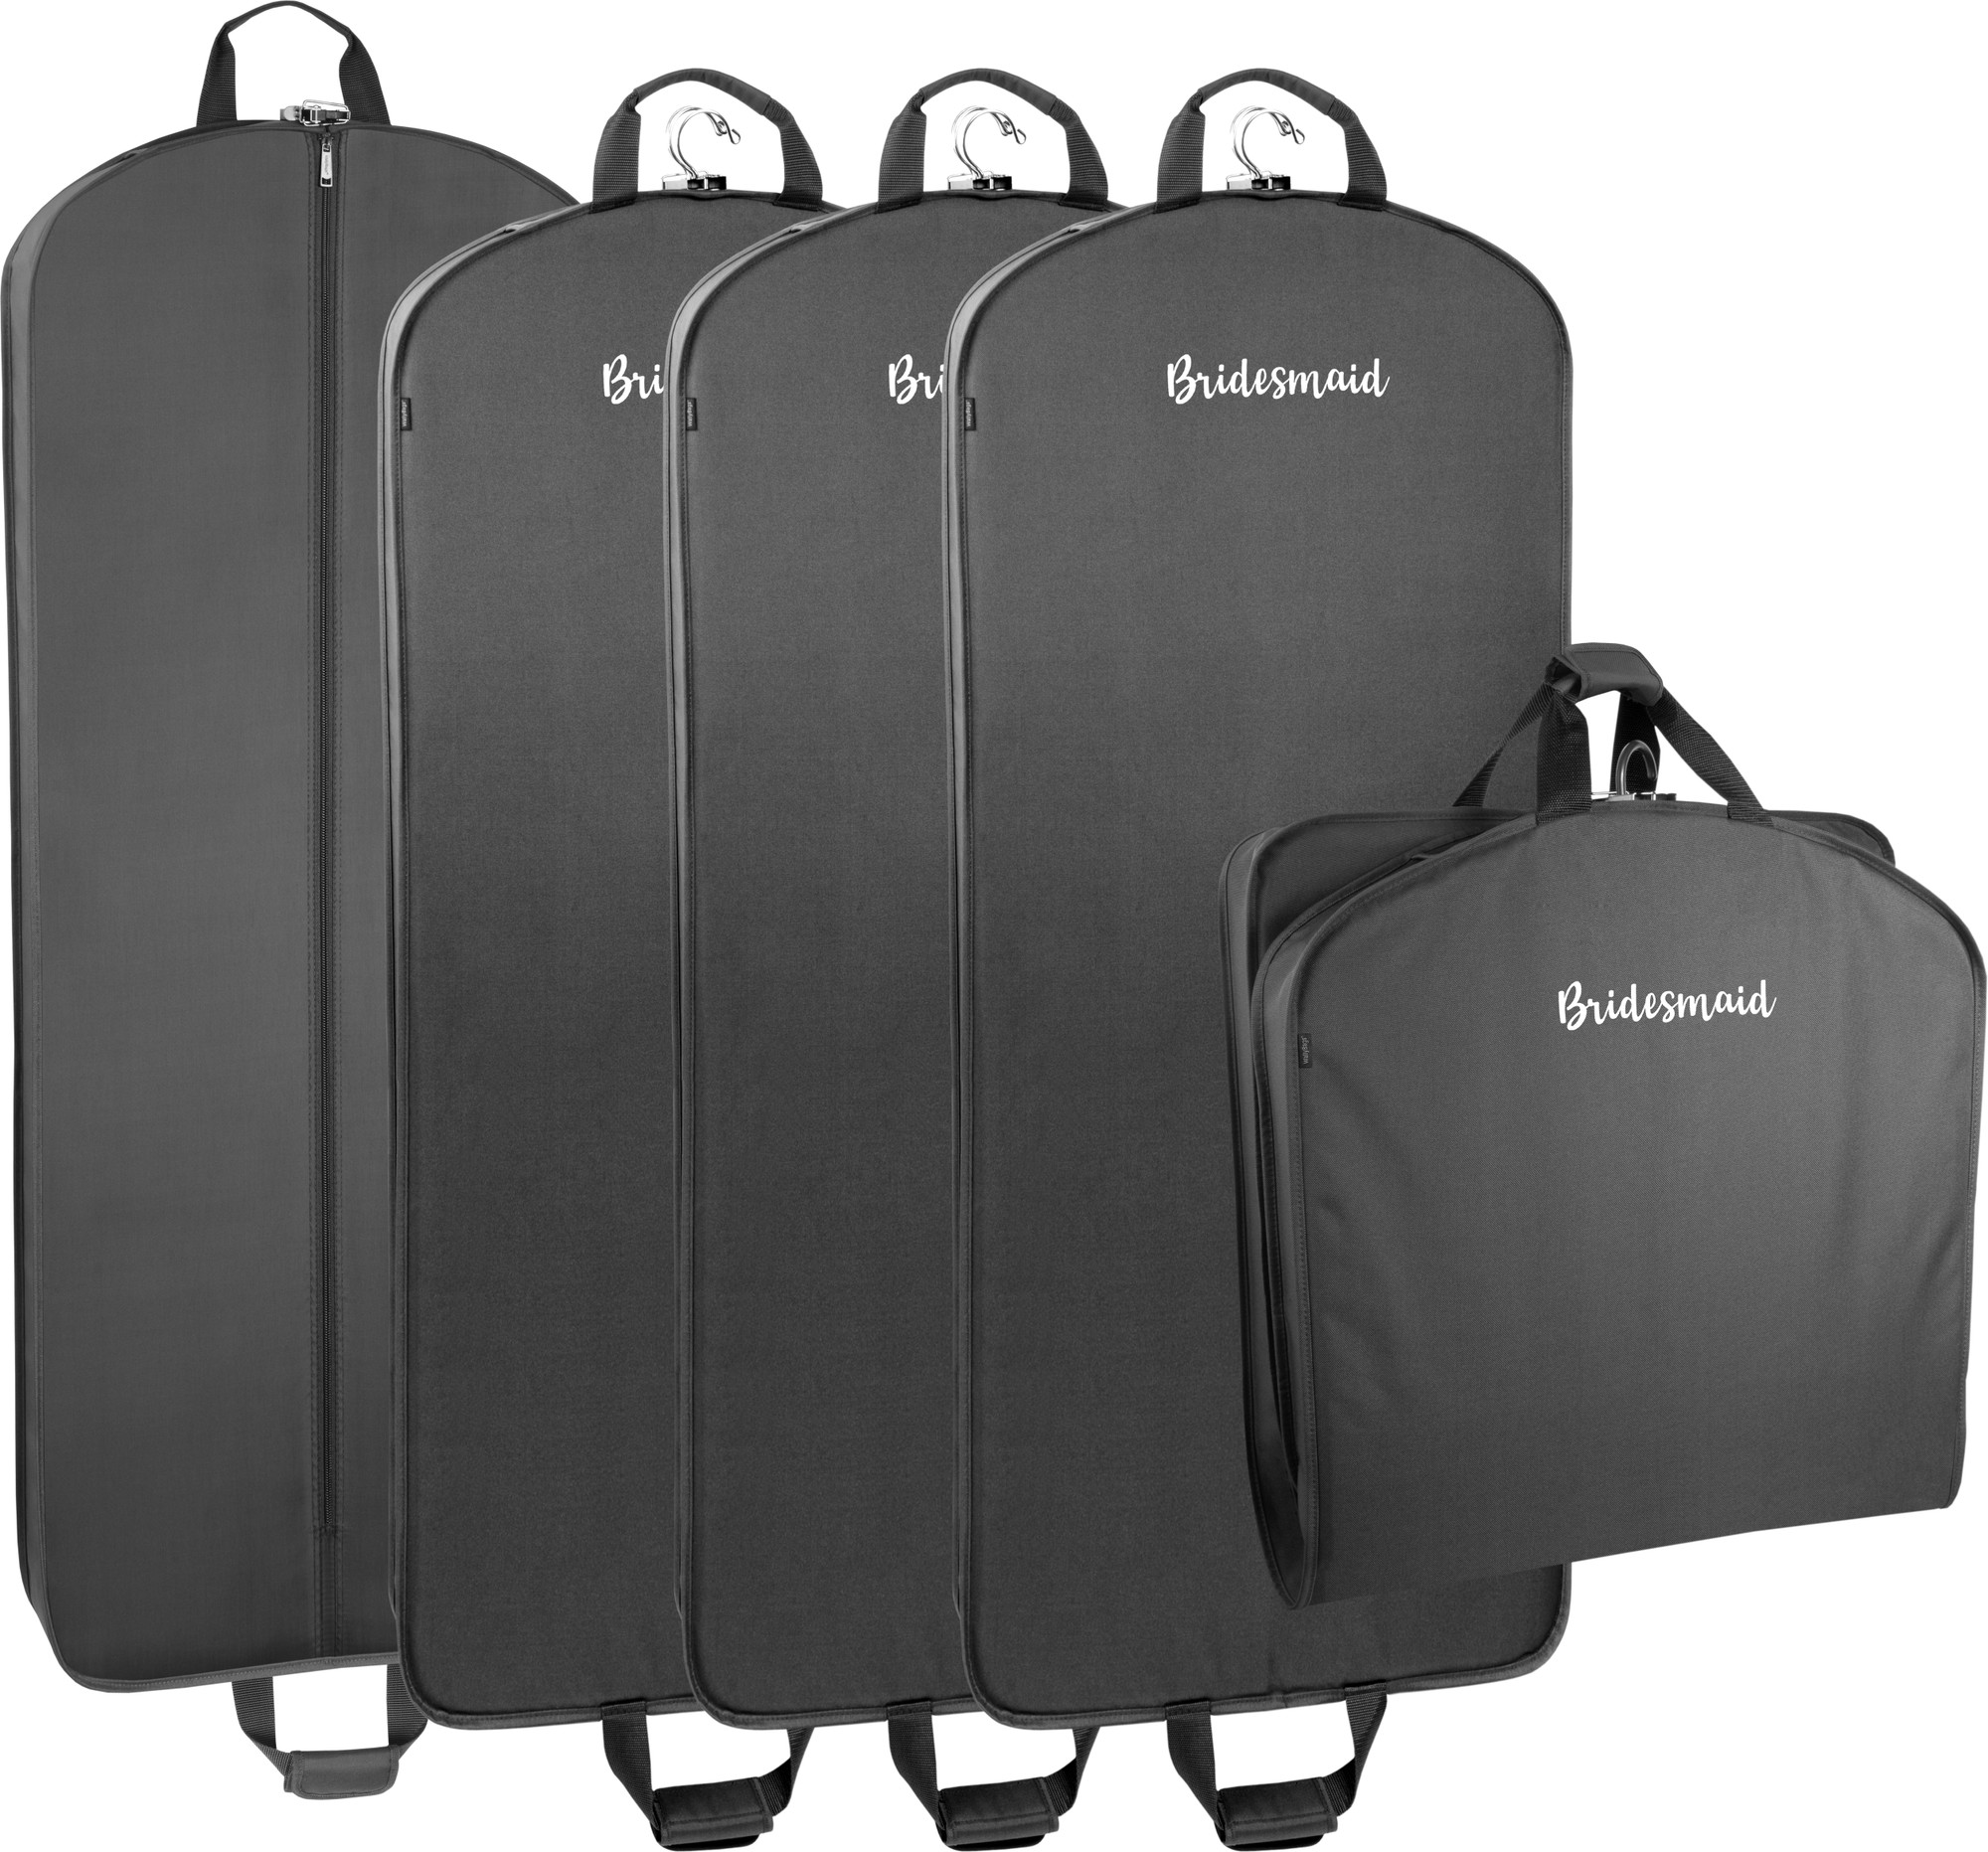 WallyBags  60 Deluxe Travel Garment Bag with Bridesmaid